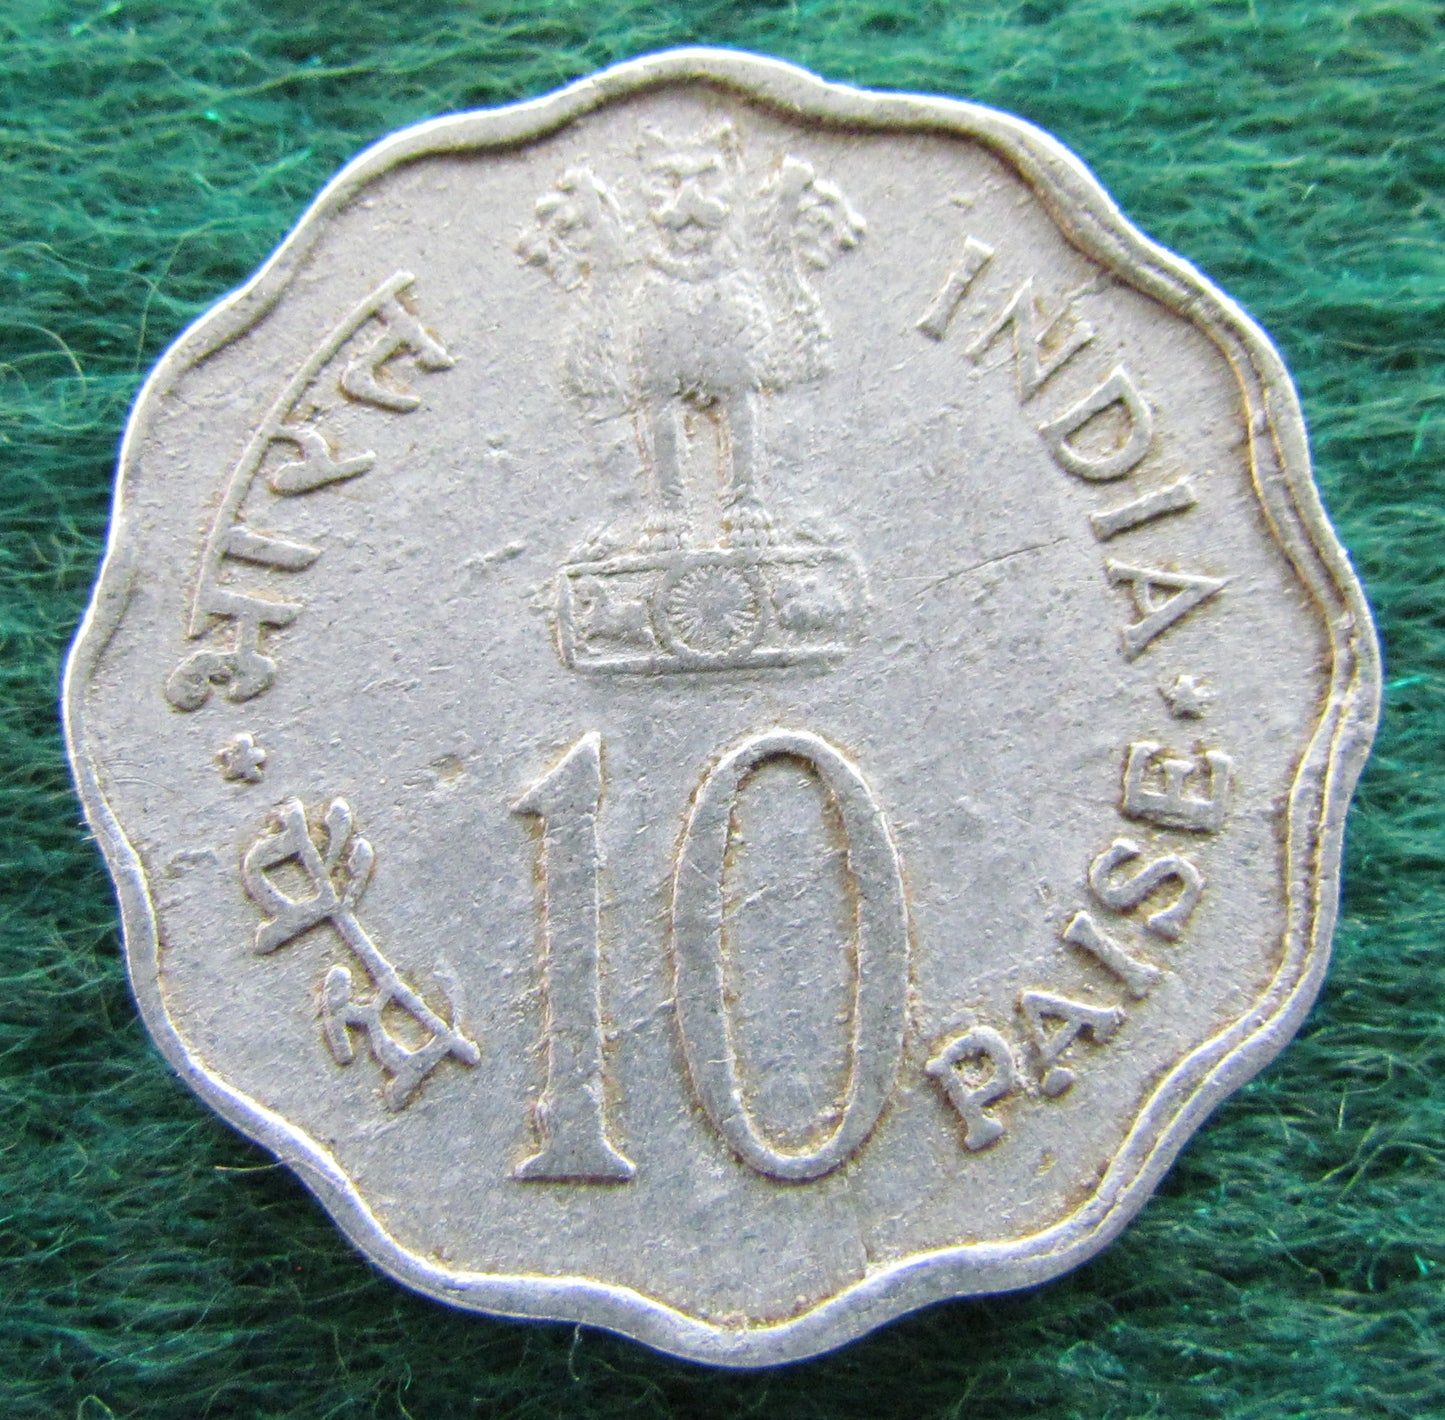 India 1979 10 Paise Coin - Circulated